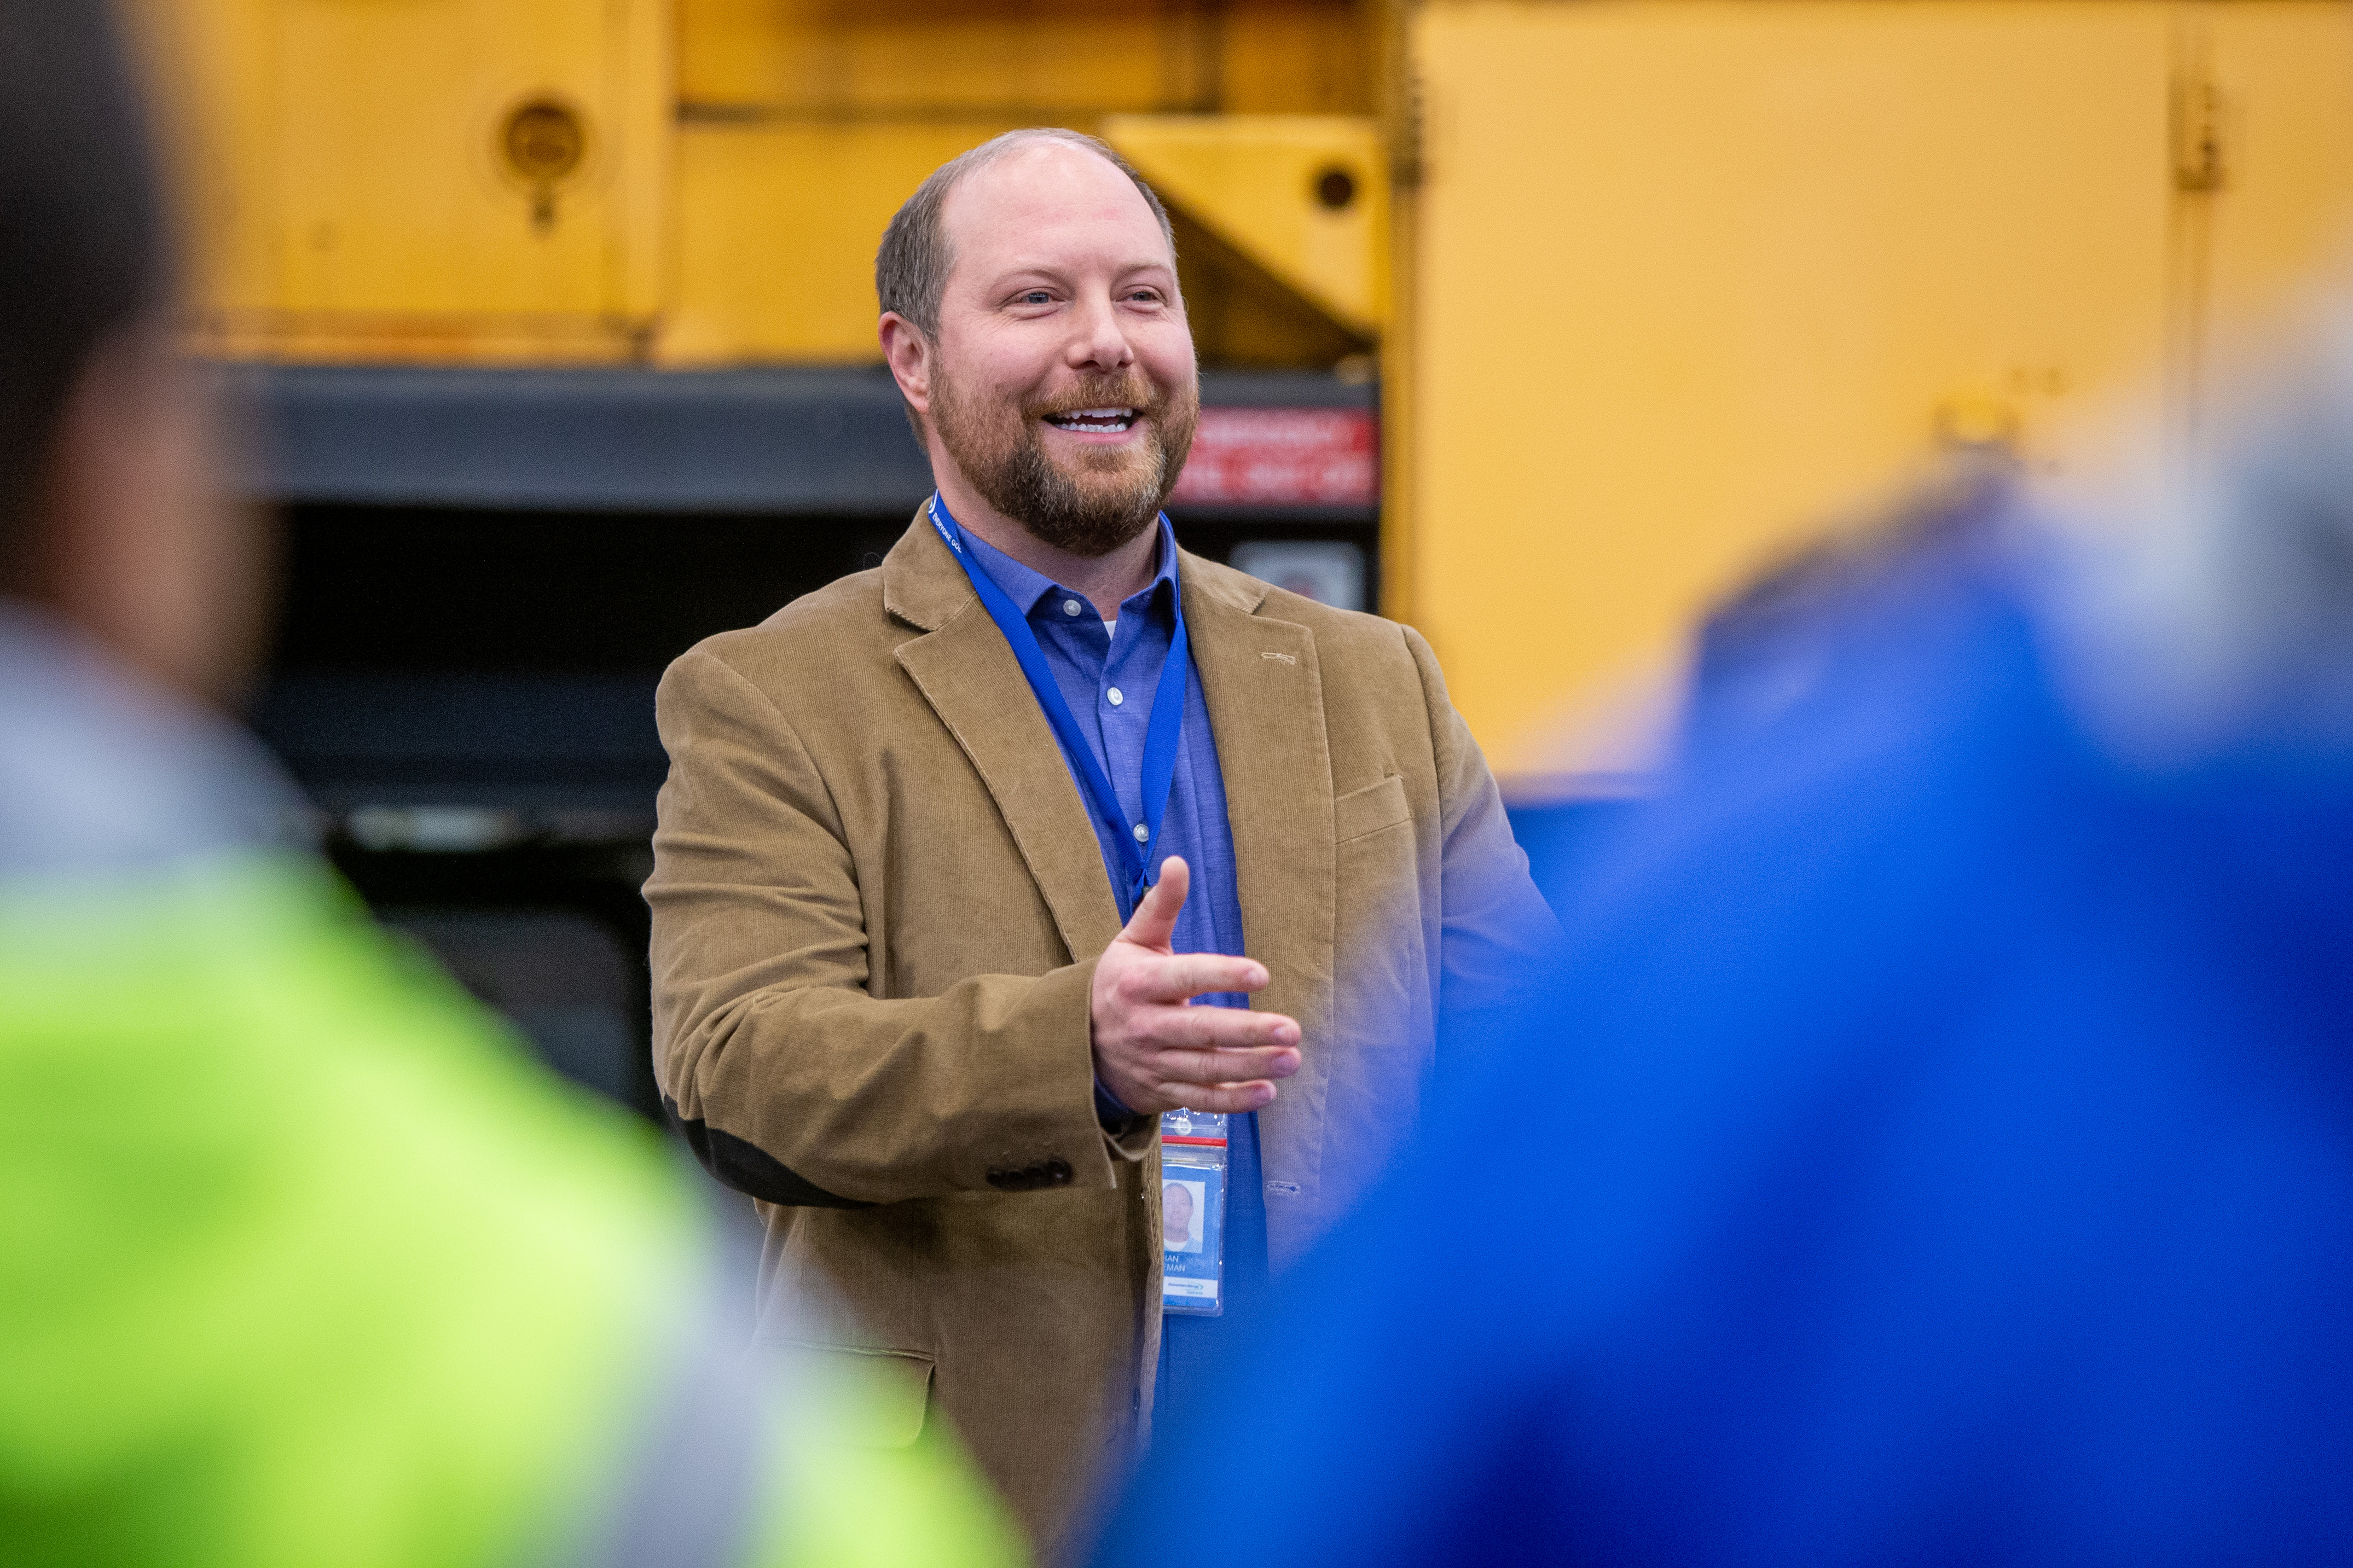 Nathan Hoffman, director of operations at the Consumers Energy J.H. Campbell plant, speaks in front of a 1979 GE diesel train locomotive at the plant in Port Sheldon Township on Monday, Feb. 13, 2023. Consumers Energy is donating the locomotive to the Coopersville and Marne Railway. (Cory Morse | MLive.com)